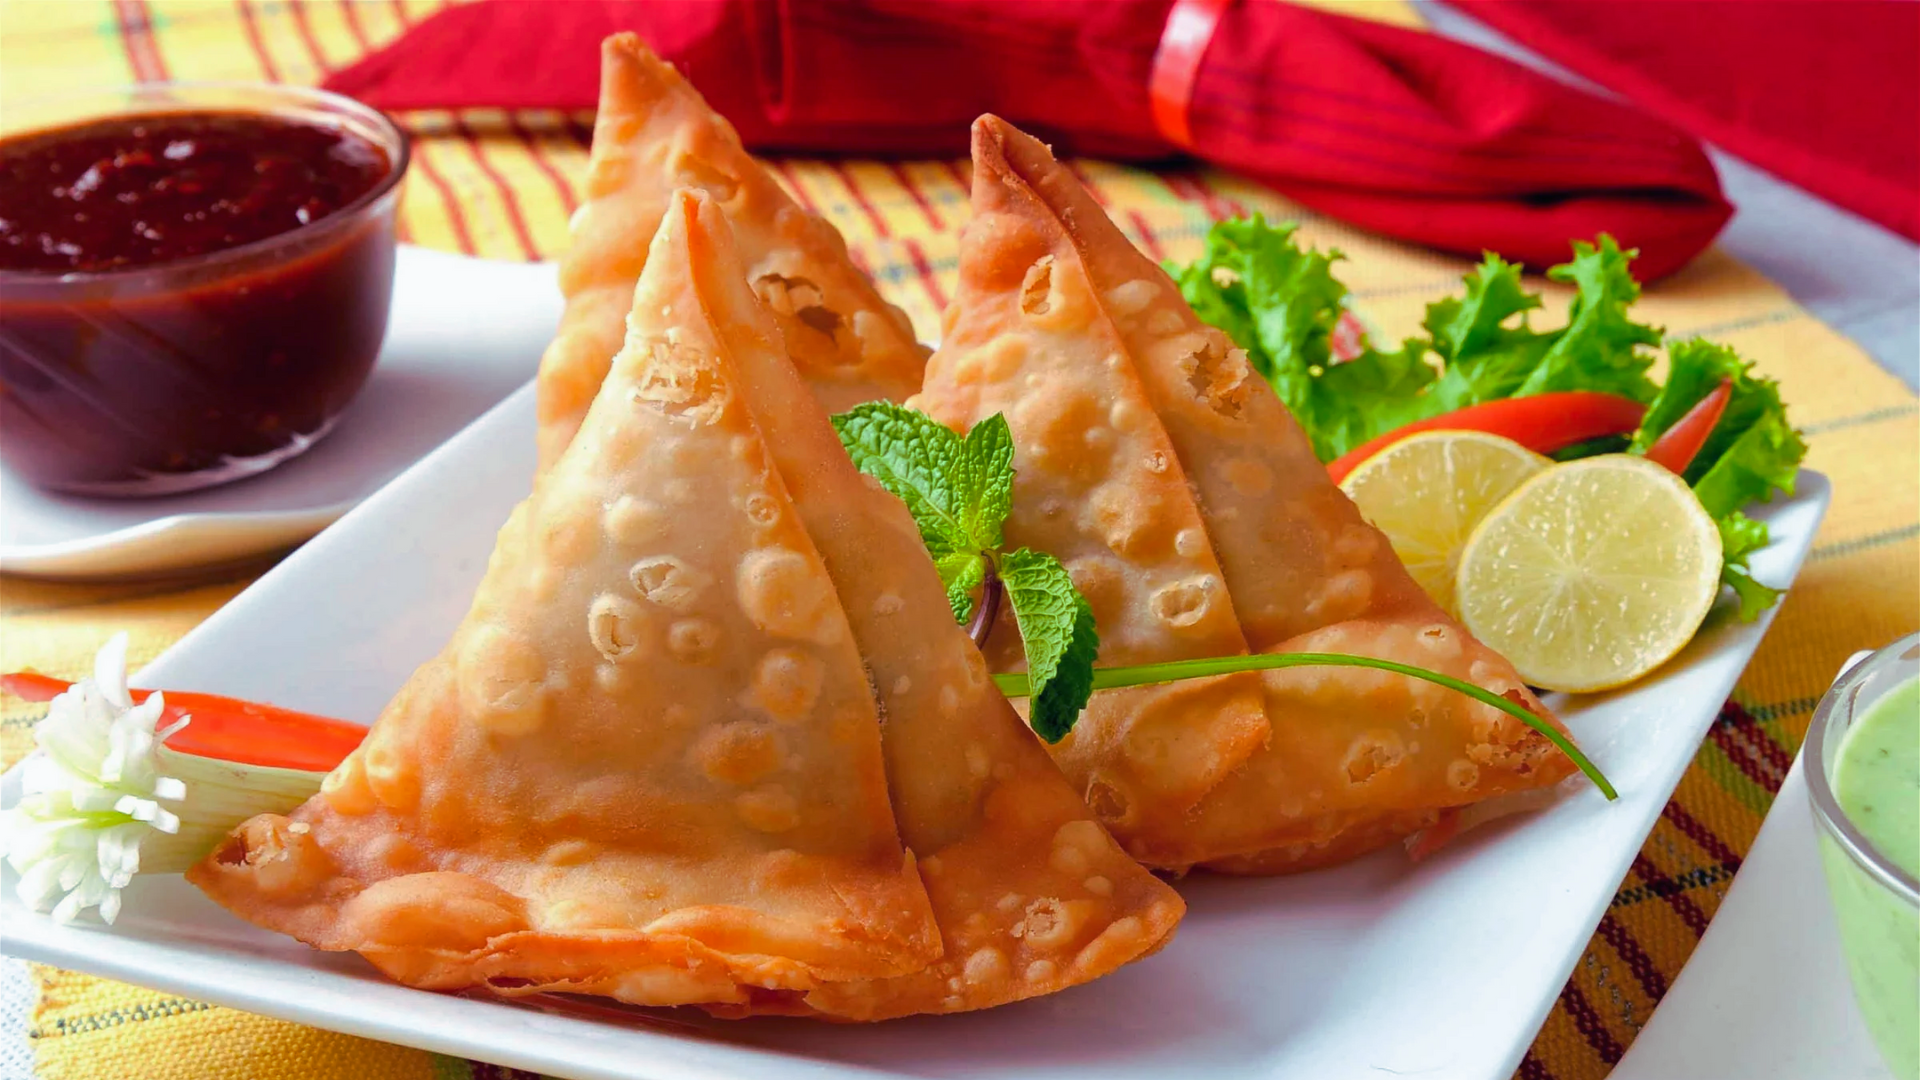 Samosa Turned As A Revenge Tool, Stuffed With Condoms, Stones In Tata Motors Canteen